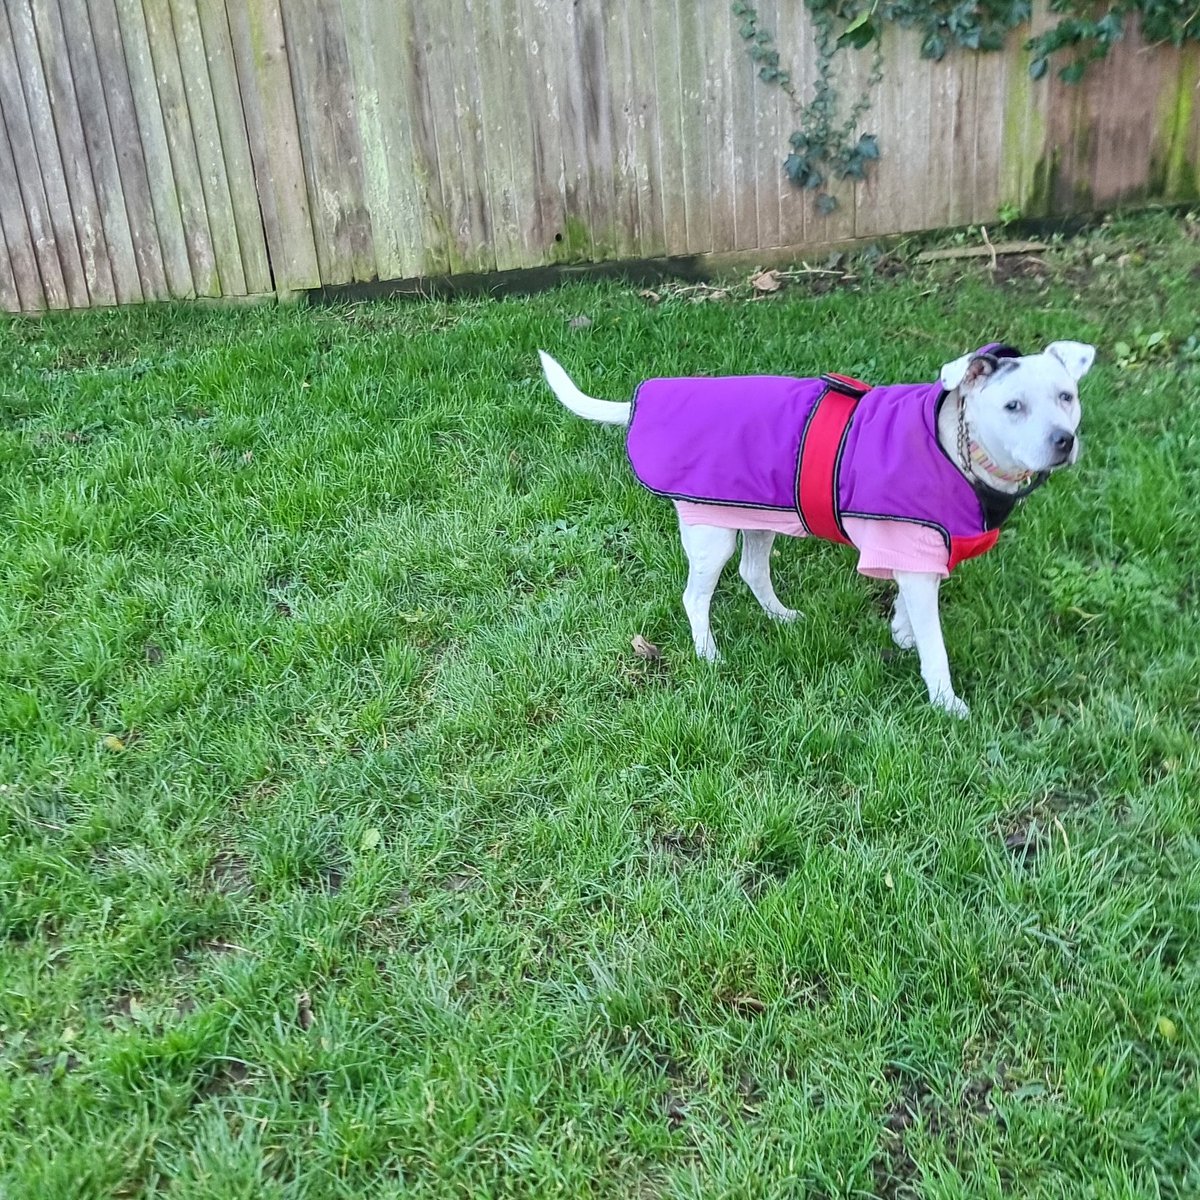 That look you give when you catch your human taking yet another picture of you #funnyanimals #dogs #dogslife #dearyme #notagain #cuteanimals #winterwalks #walkies #winter #WrappedUpWarm @DogsTrust #AdoptDontShop #rescuedogs #RescueDogsRock #Really